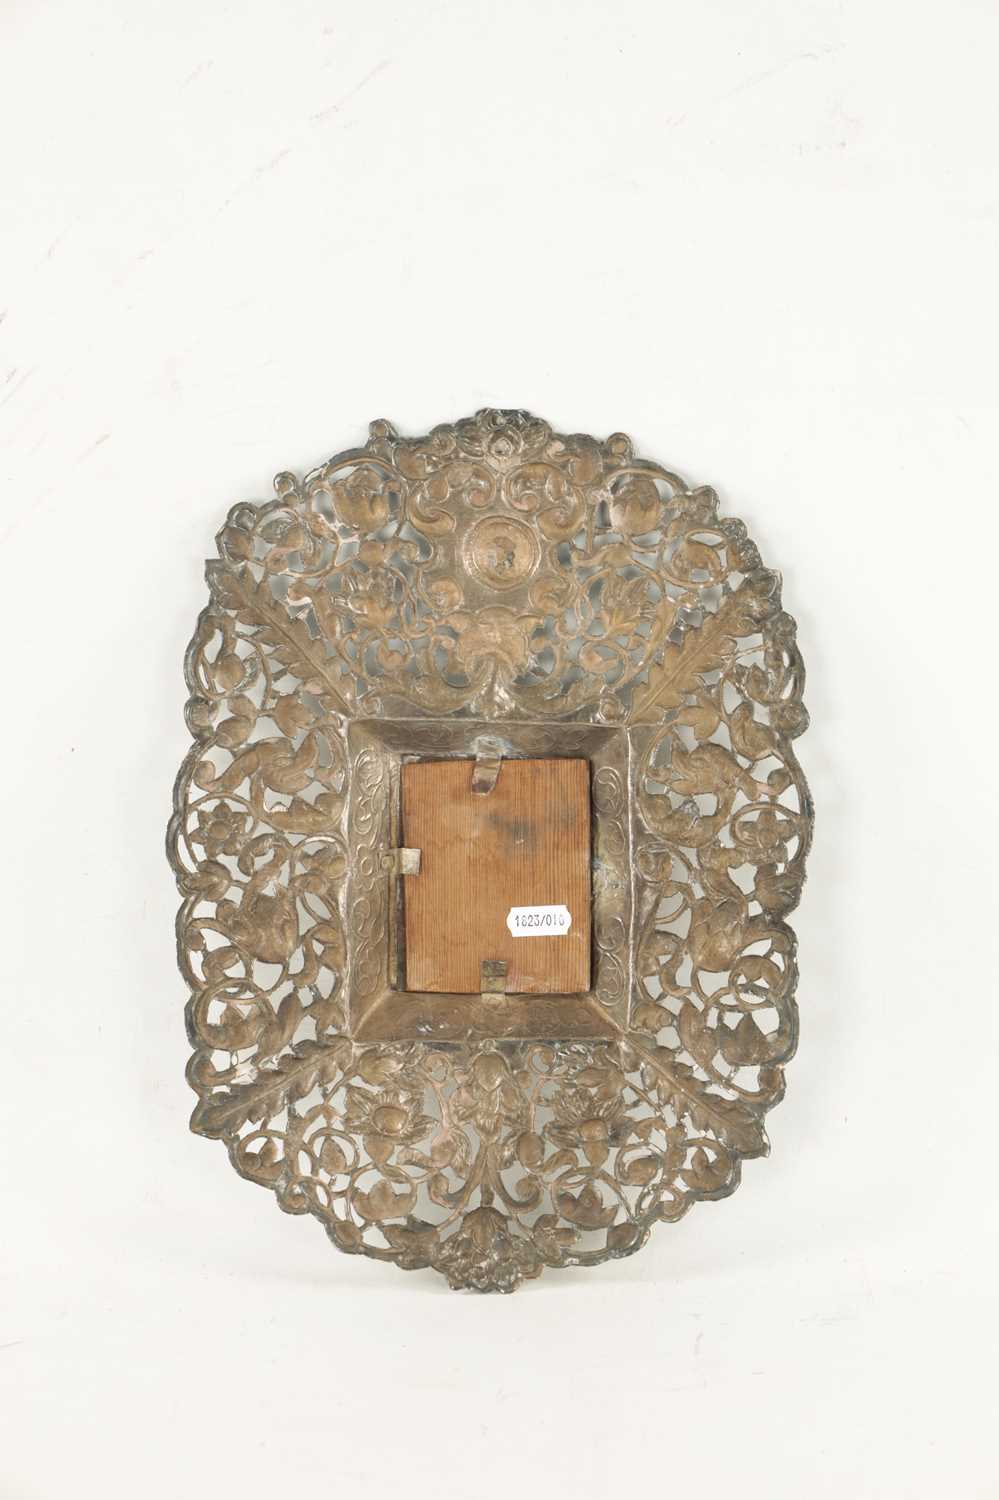 AN EARLY 18TH CENTURY SOUTH AMERICAN SILVER FRAME - Image 6 of 6